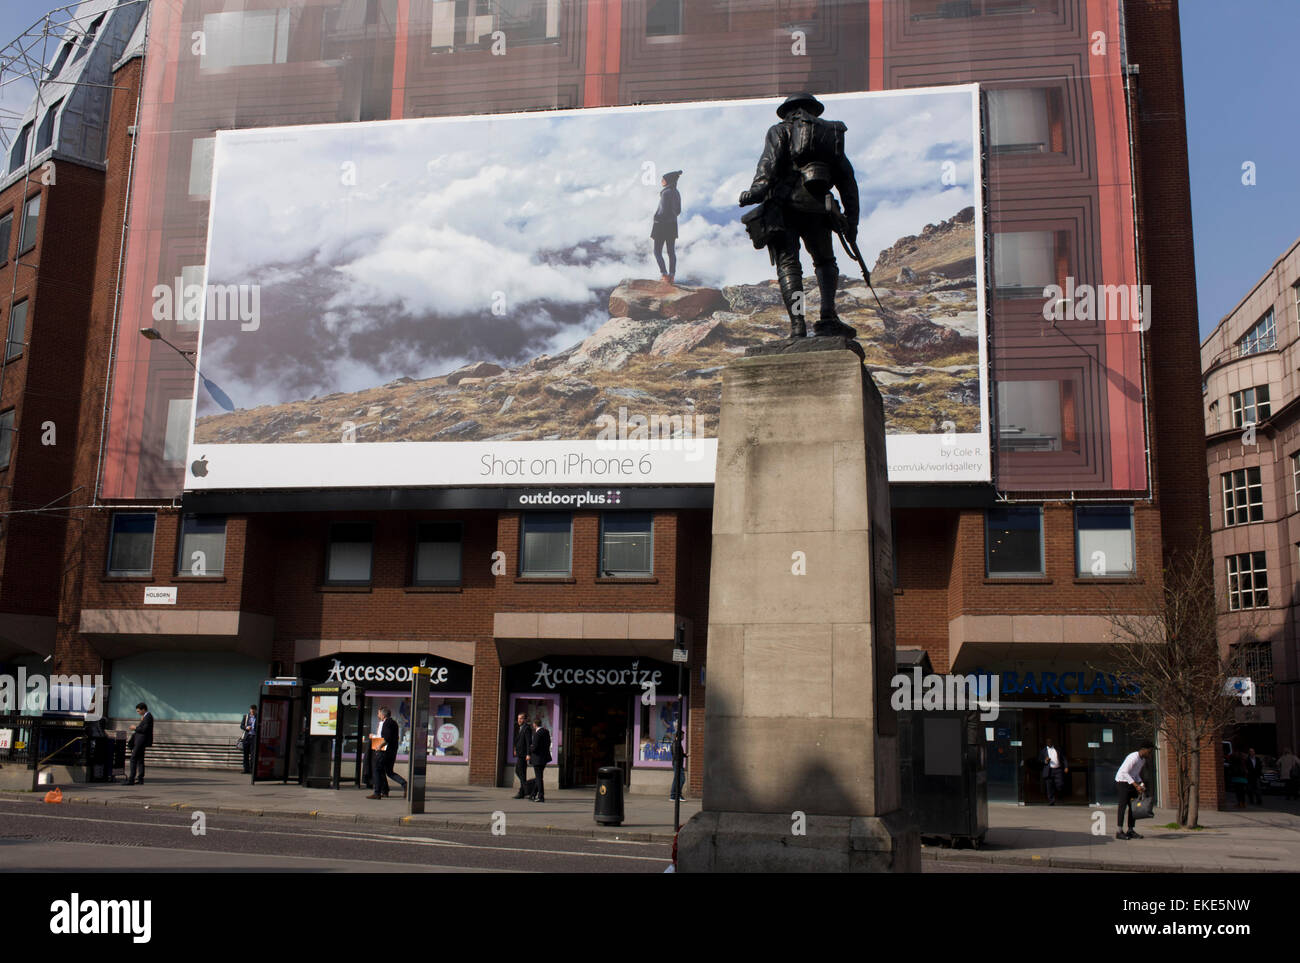 A giant billboard ad for the use of iPhones seen on the side of a central London building, juxtaposed with a WW1 memorial soldier of the Royal Fusiliers. Stock Photo